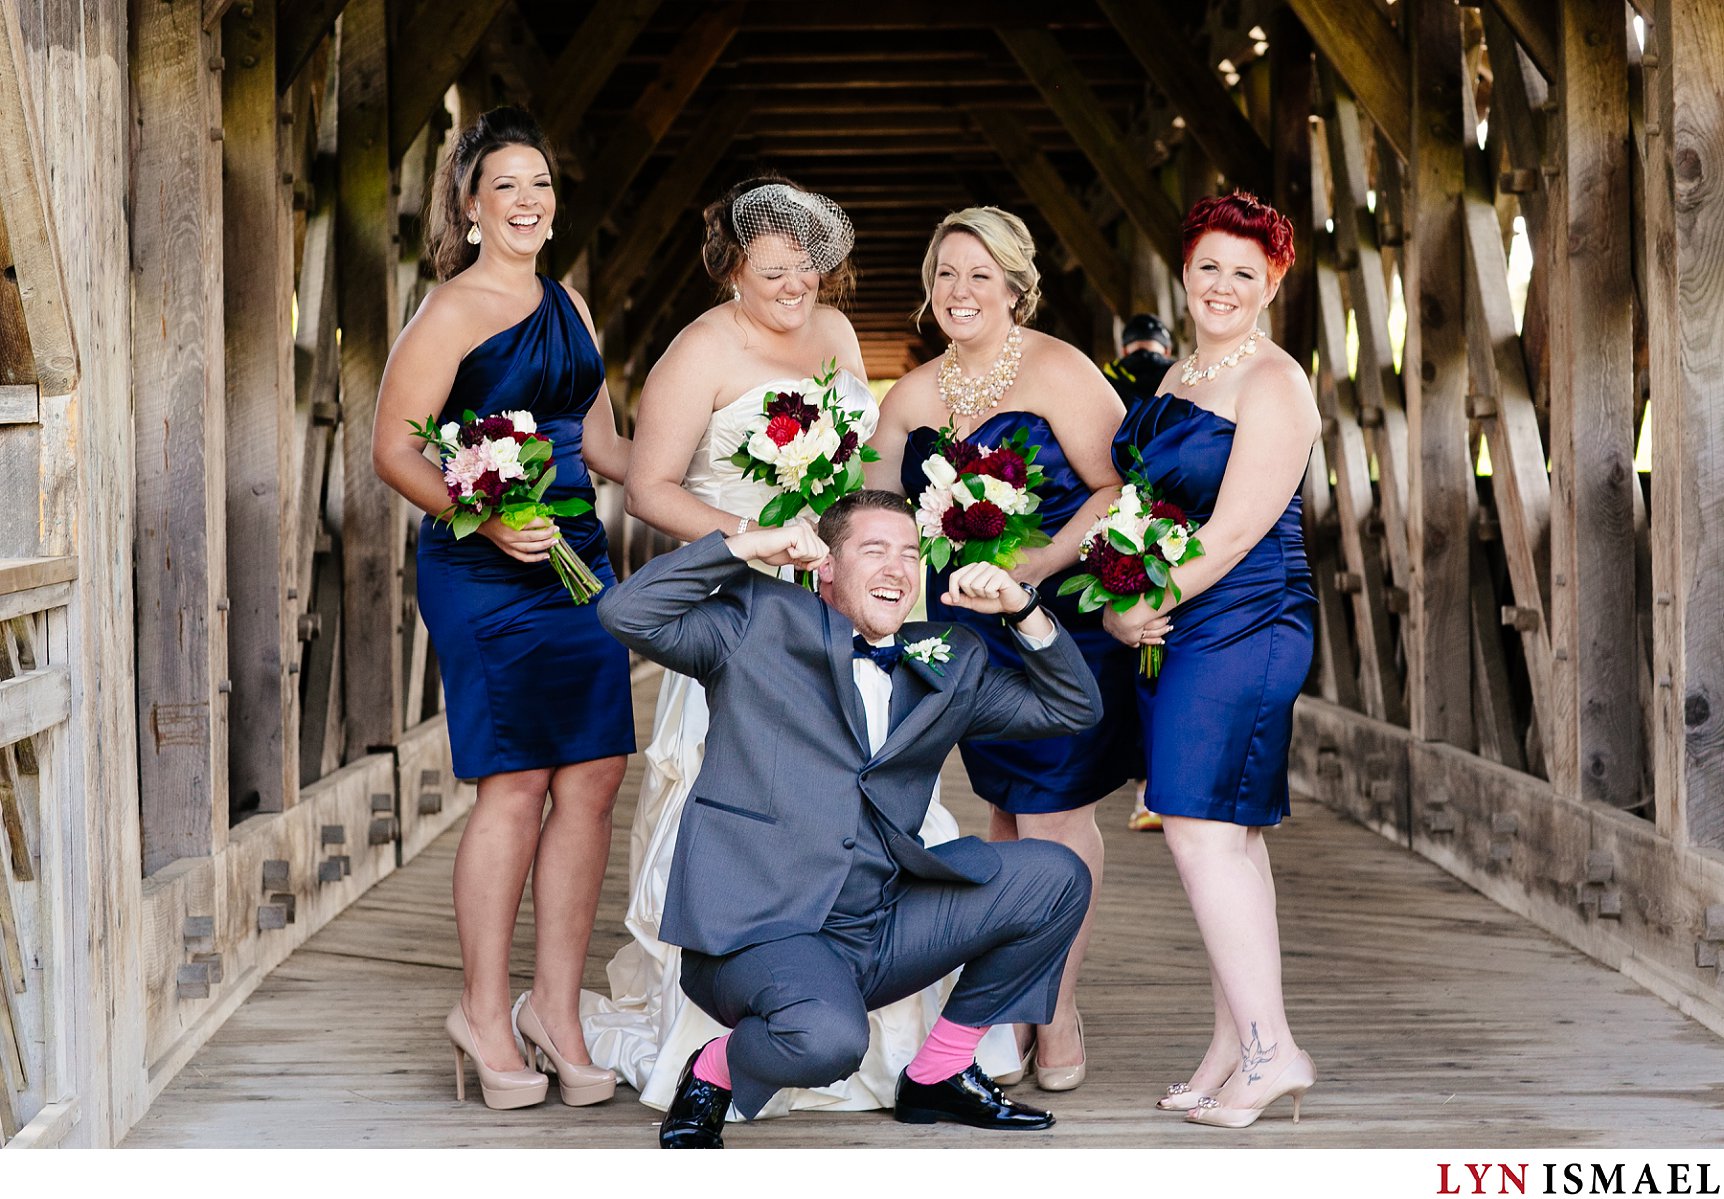 Man of honour with pink socks hanging out with the bride and her bridesmaids.